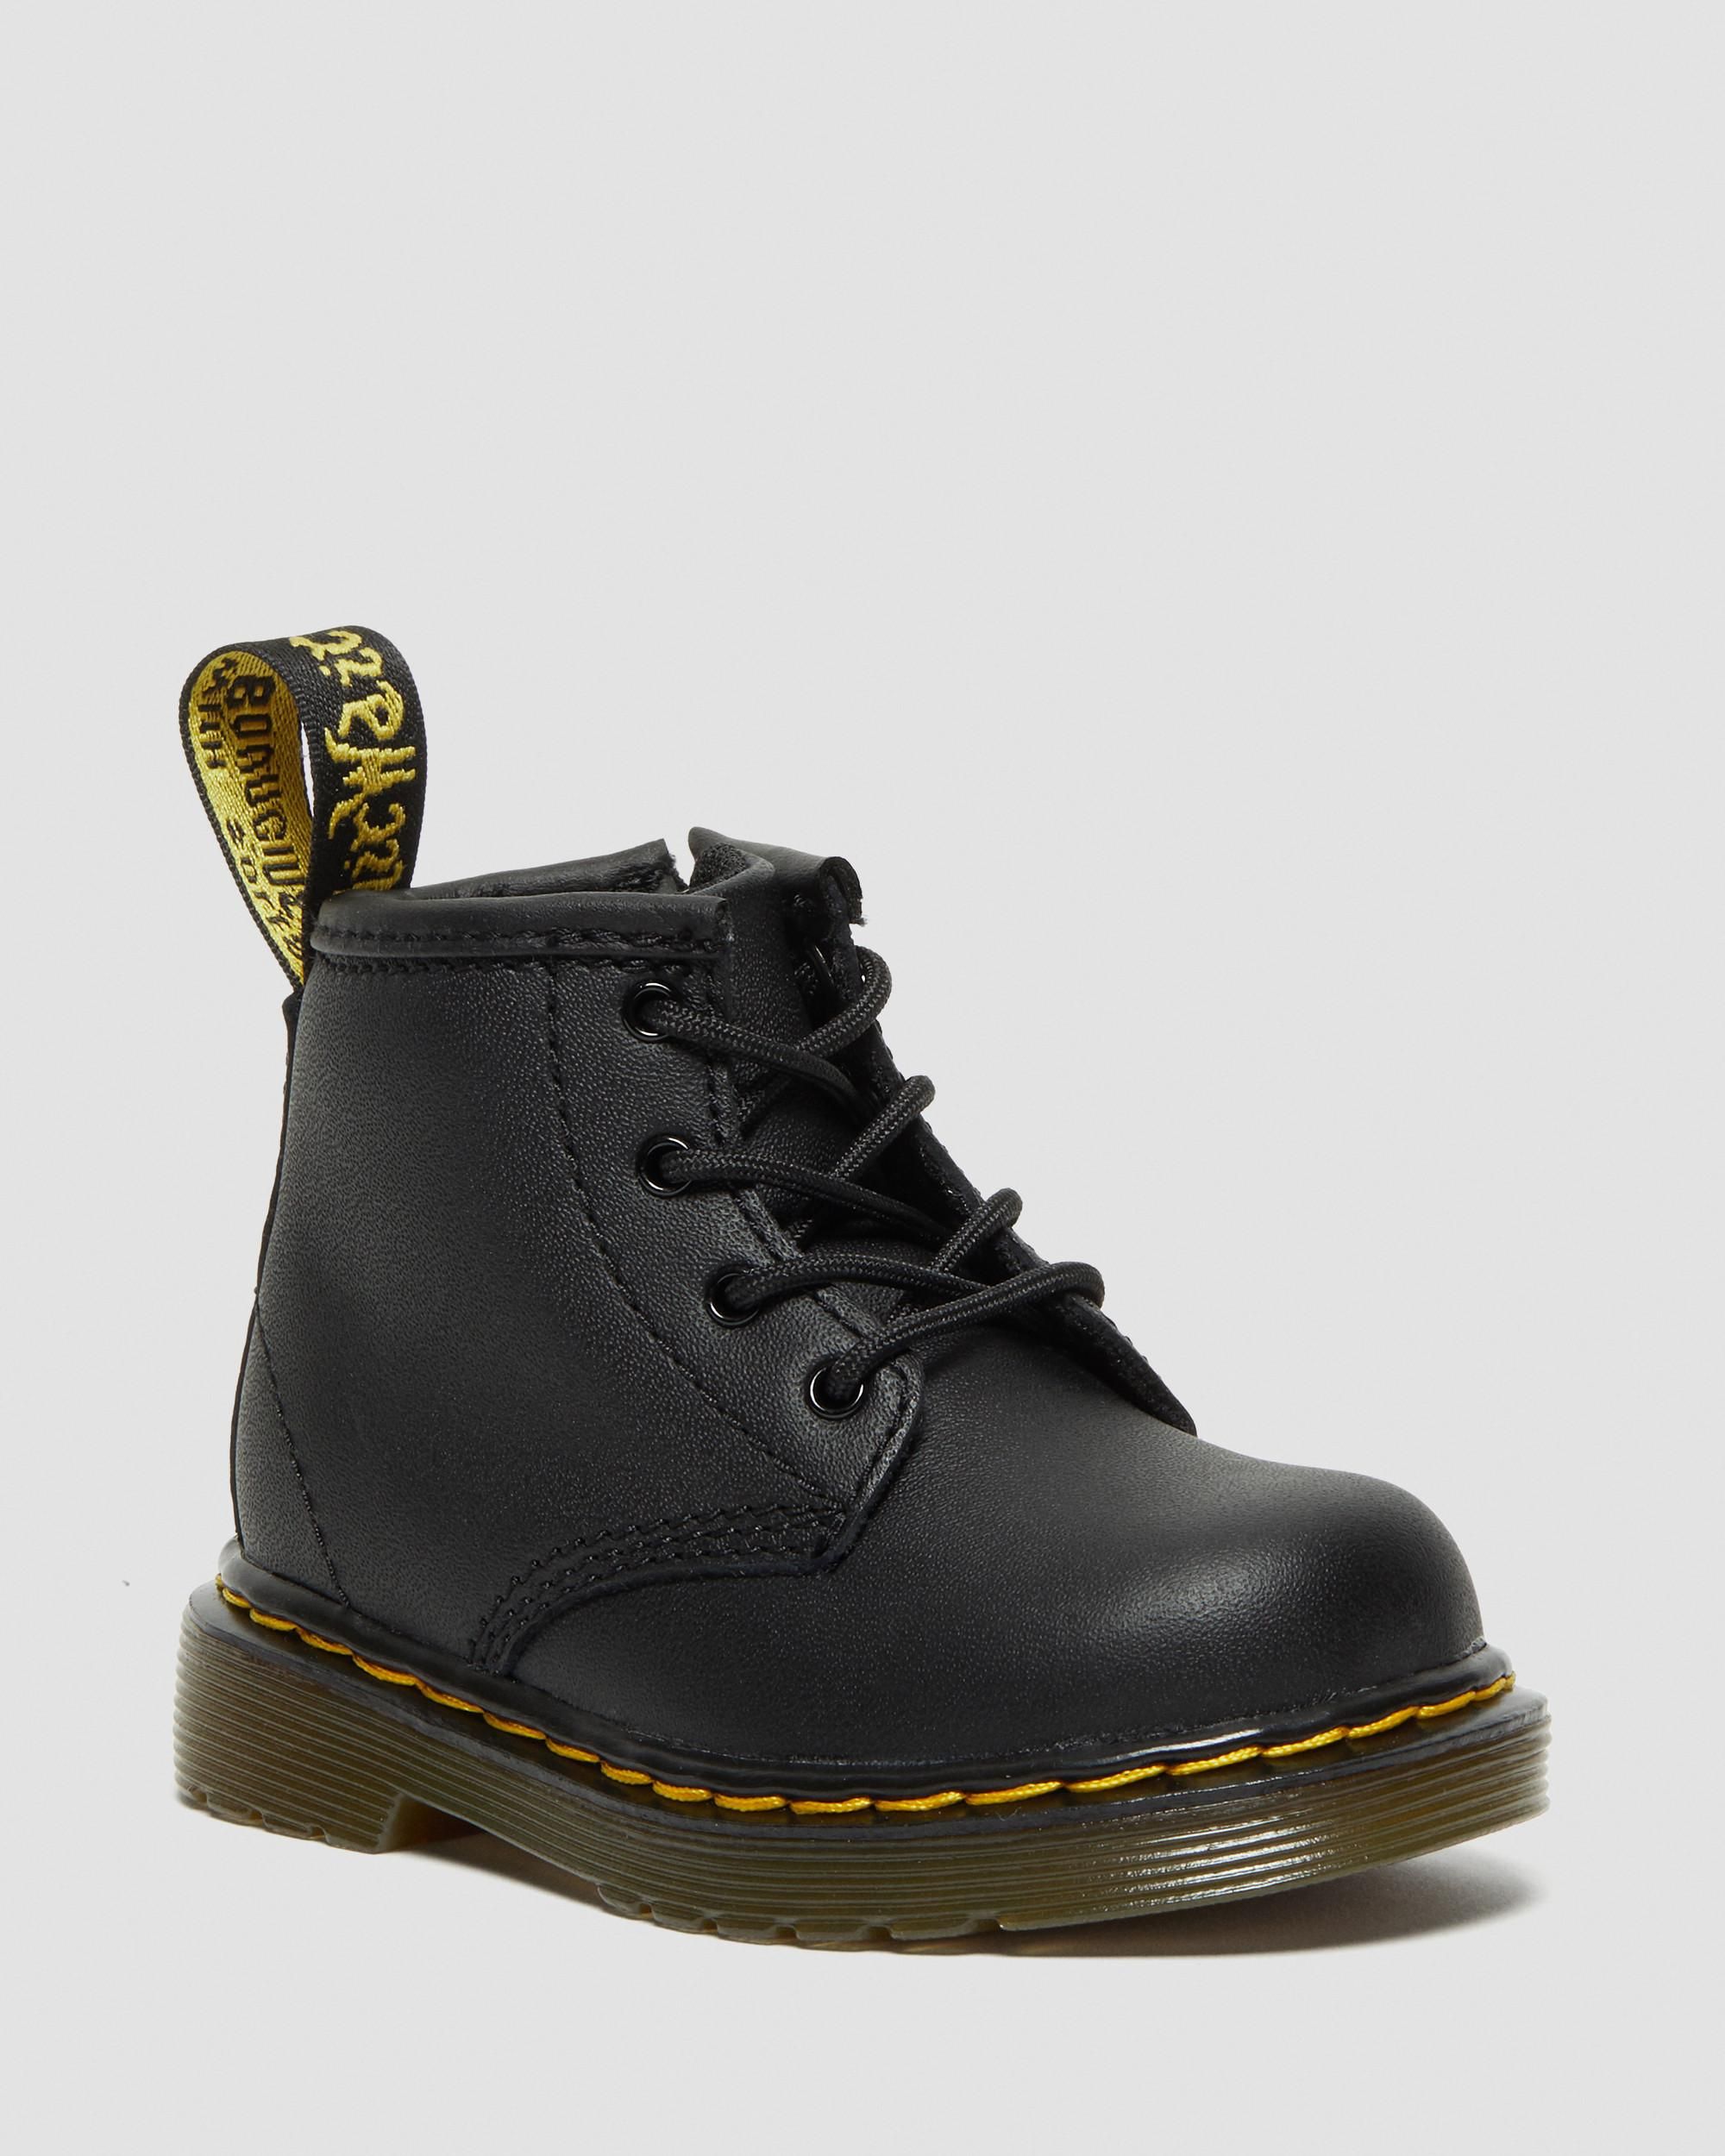 Infant 1460 Softy T Leather Lace Up Boots | Dr. Martens